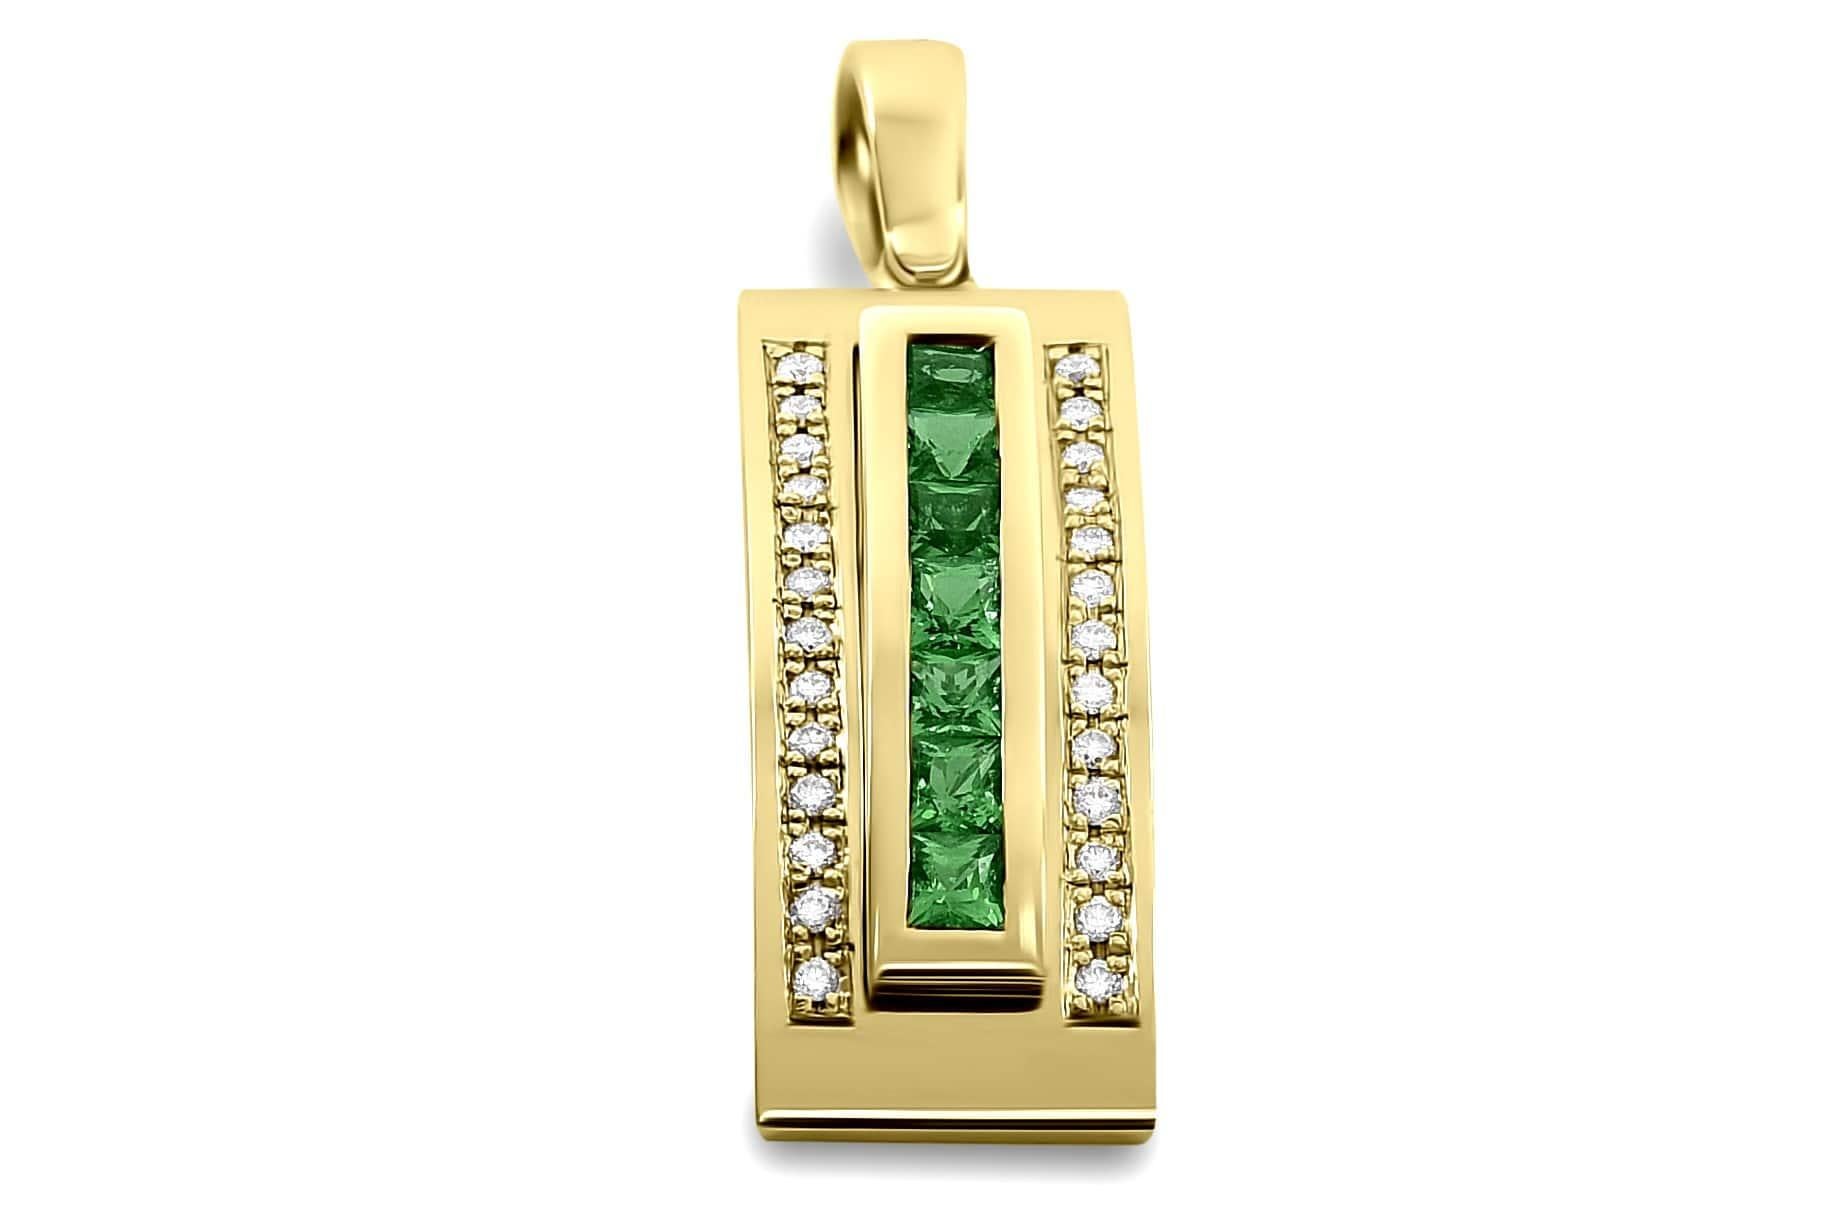 This stunning streamlined design pendant has been crafted with sleek elegance in mind. The solid 18k yellow gold foundation is brought to life by two rows of the finest brilliant cut diamonds. The centre insert is engineered to securely clip in and